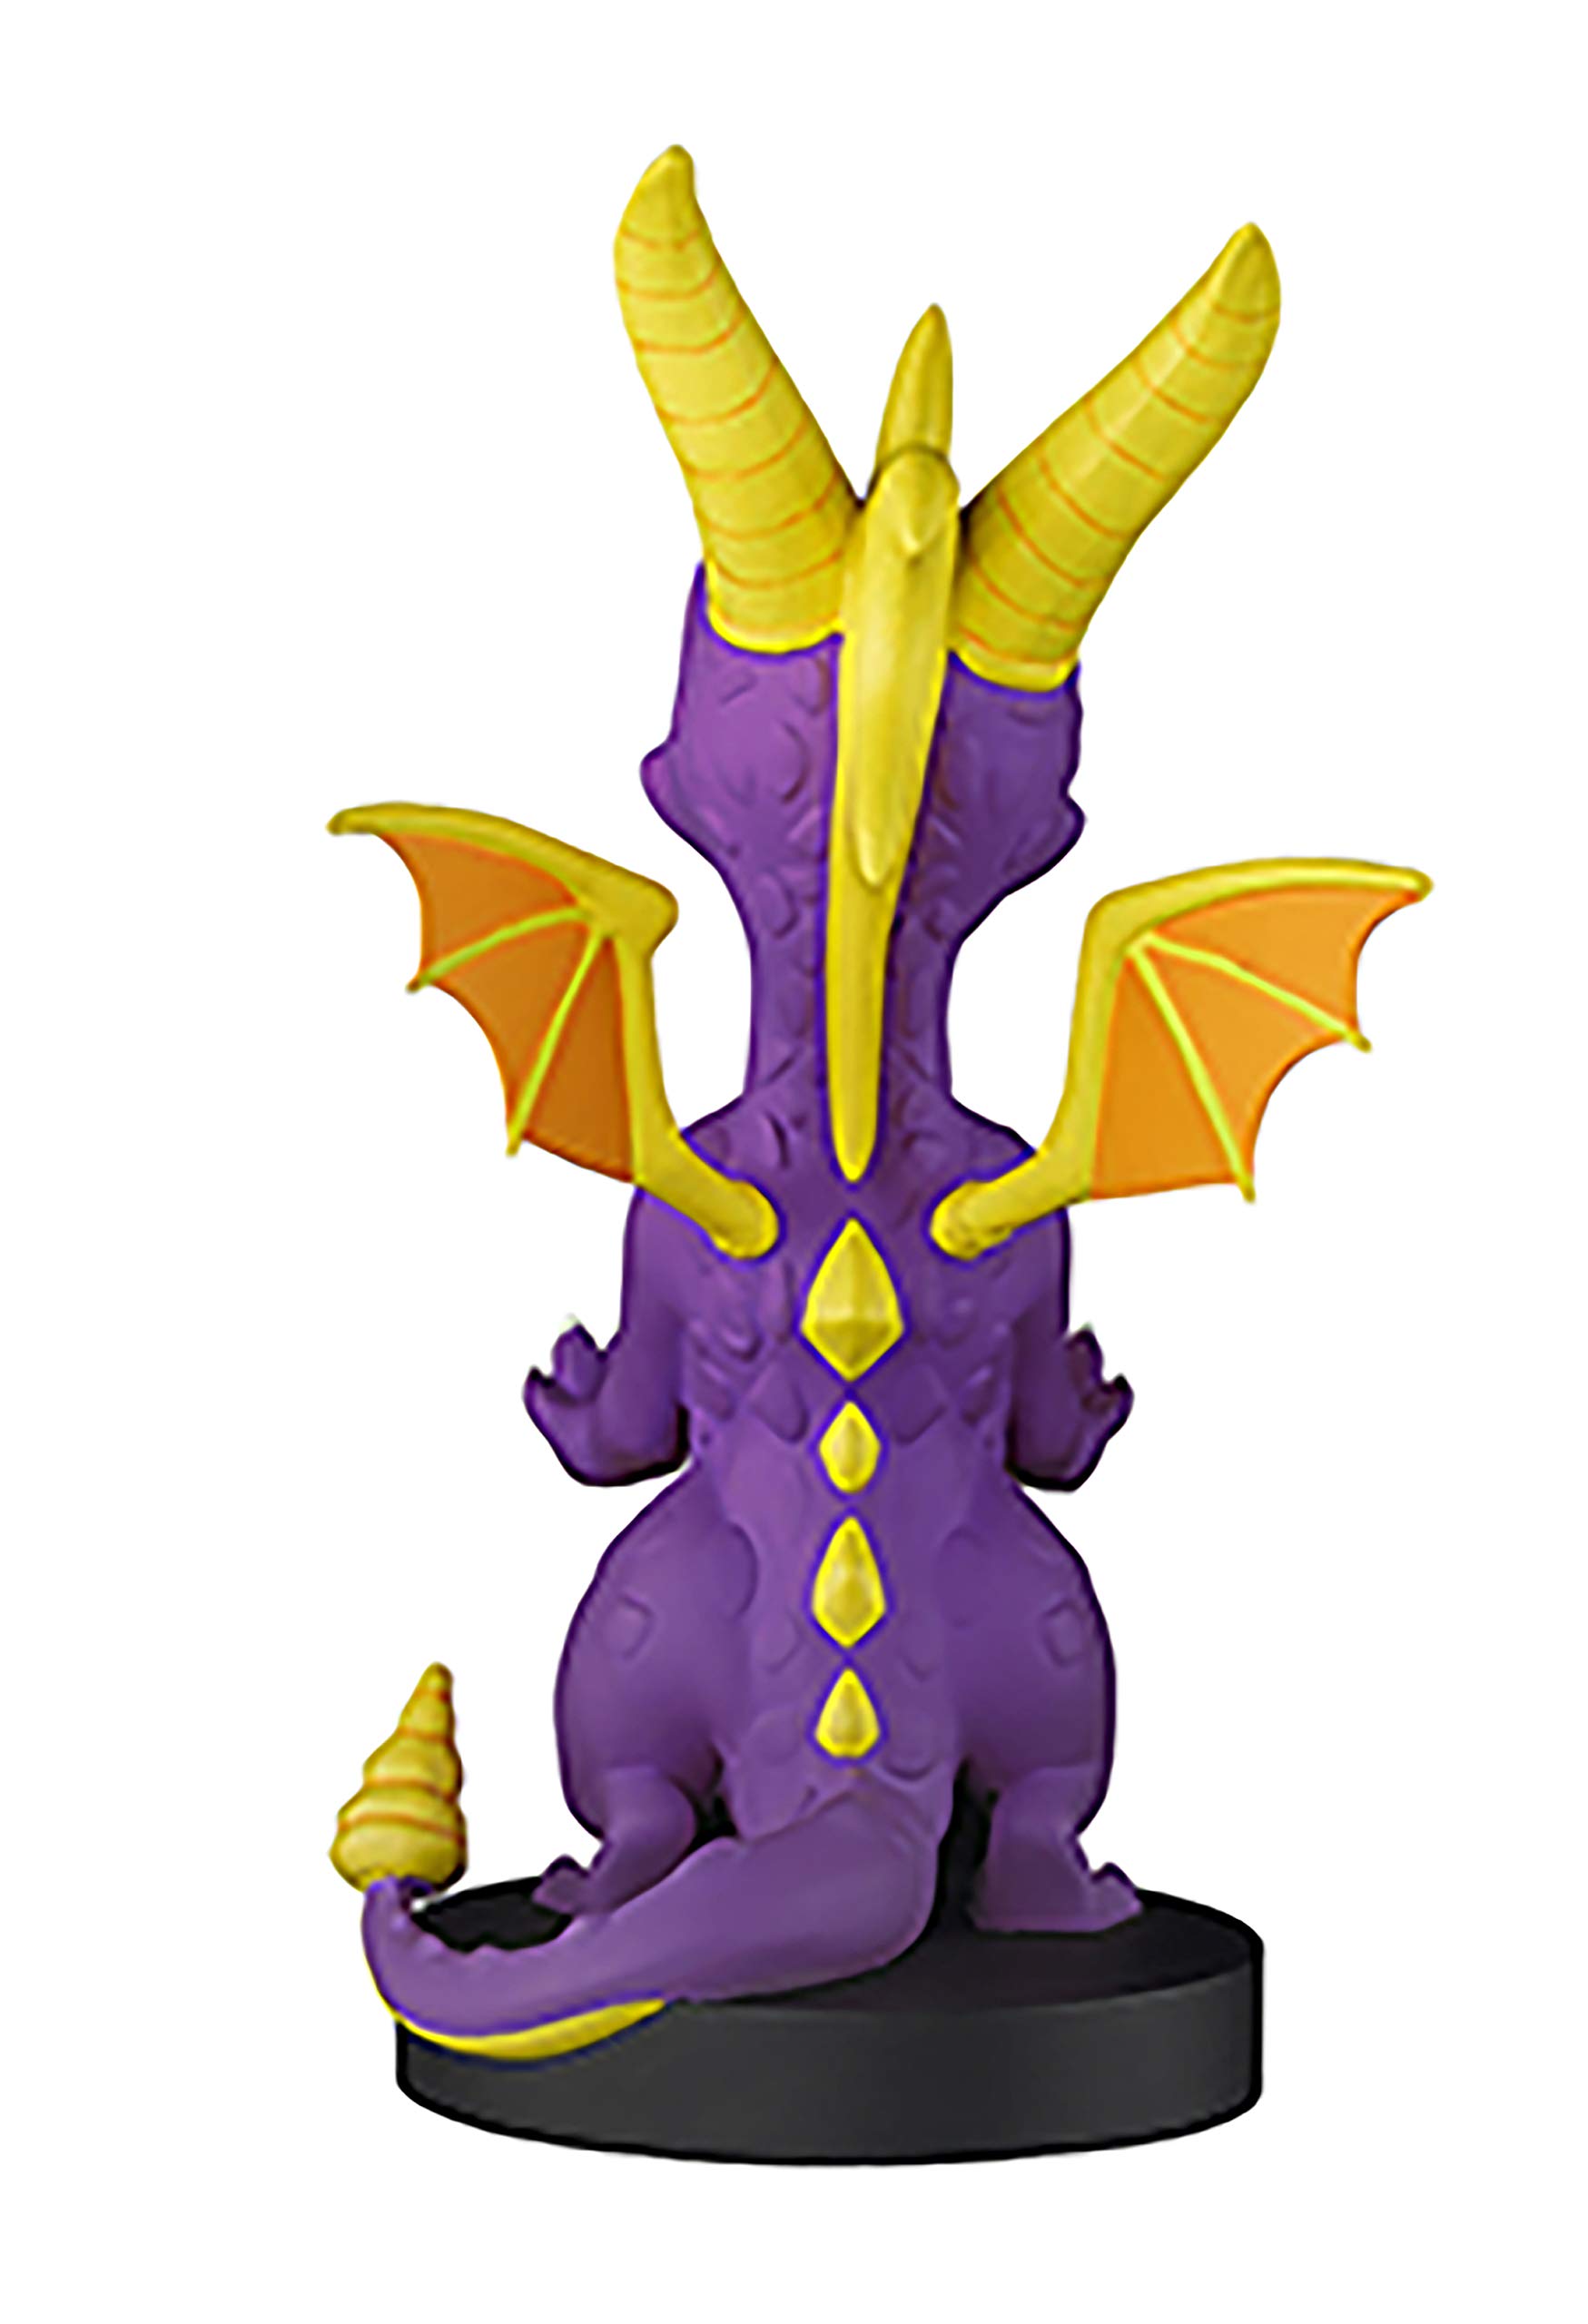 Exquisite Gaming: Spyro Cable Guy, Holds PlayStation and Xbox Game Controllers, Stands 8'' Tall, Comes with a 2M Cable for Charging your Device, Works with all Smart Phones